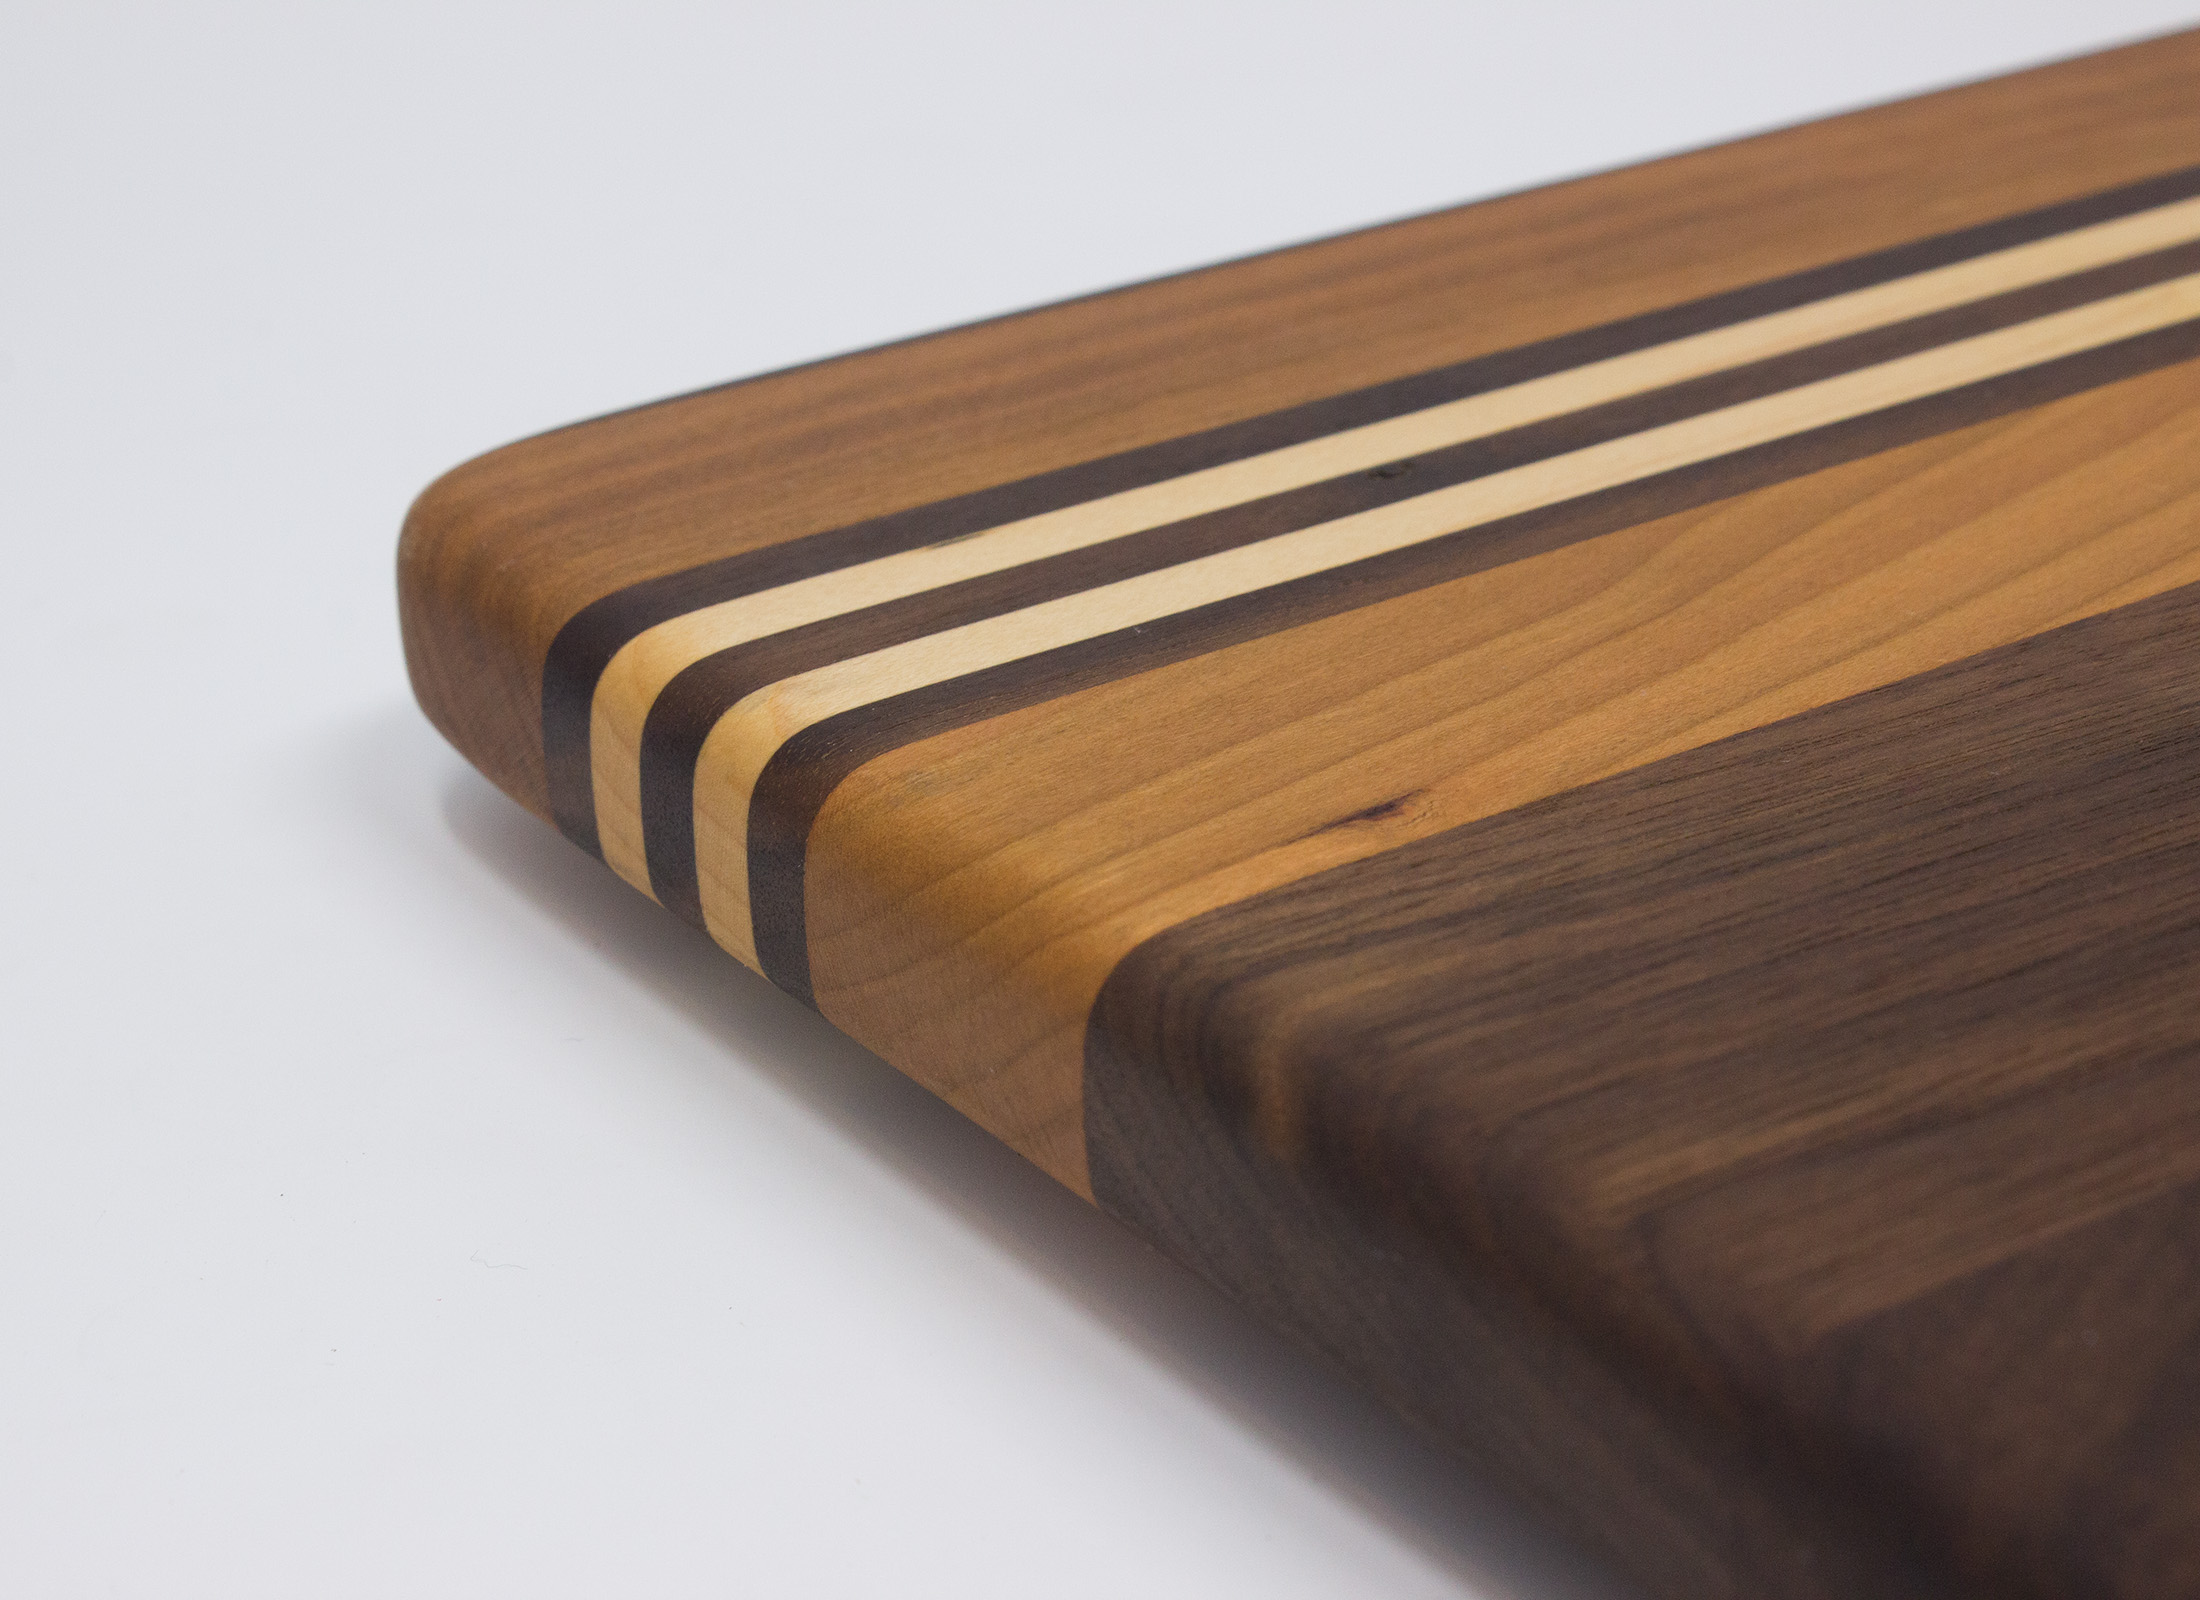 https://www.rockfordwoodcrafts.com/wp-content/uploads/Cherry-Walnut-and-Maple-with-Offset-Stripes-Cutting-Board-Corner-Close-Up.jpg